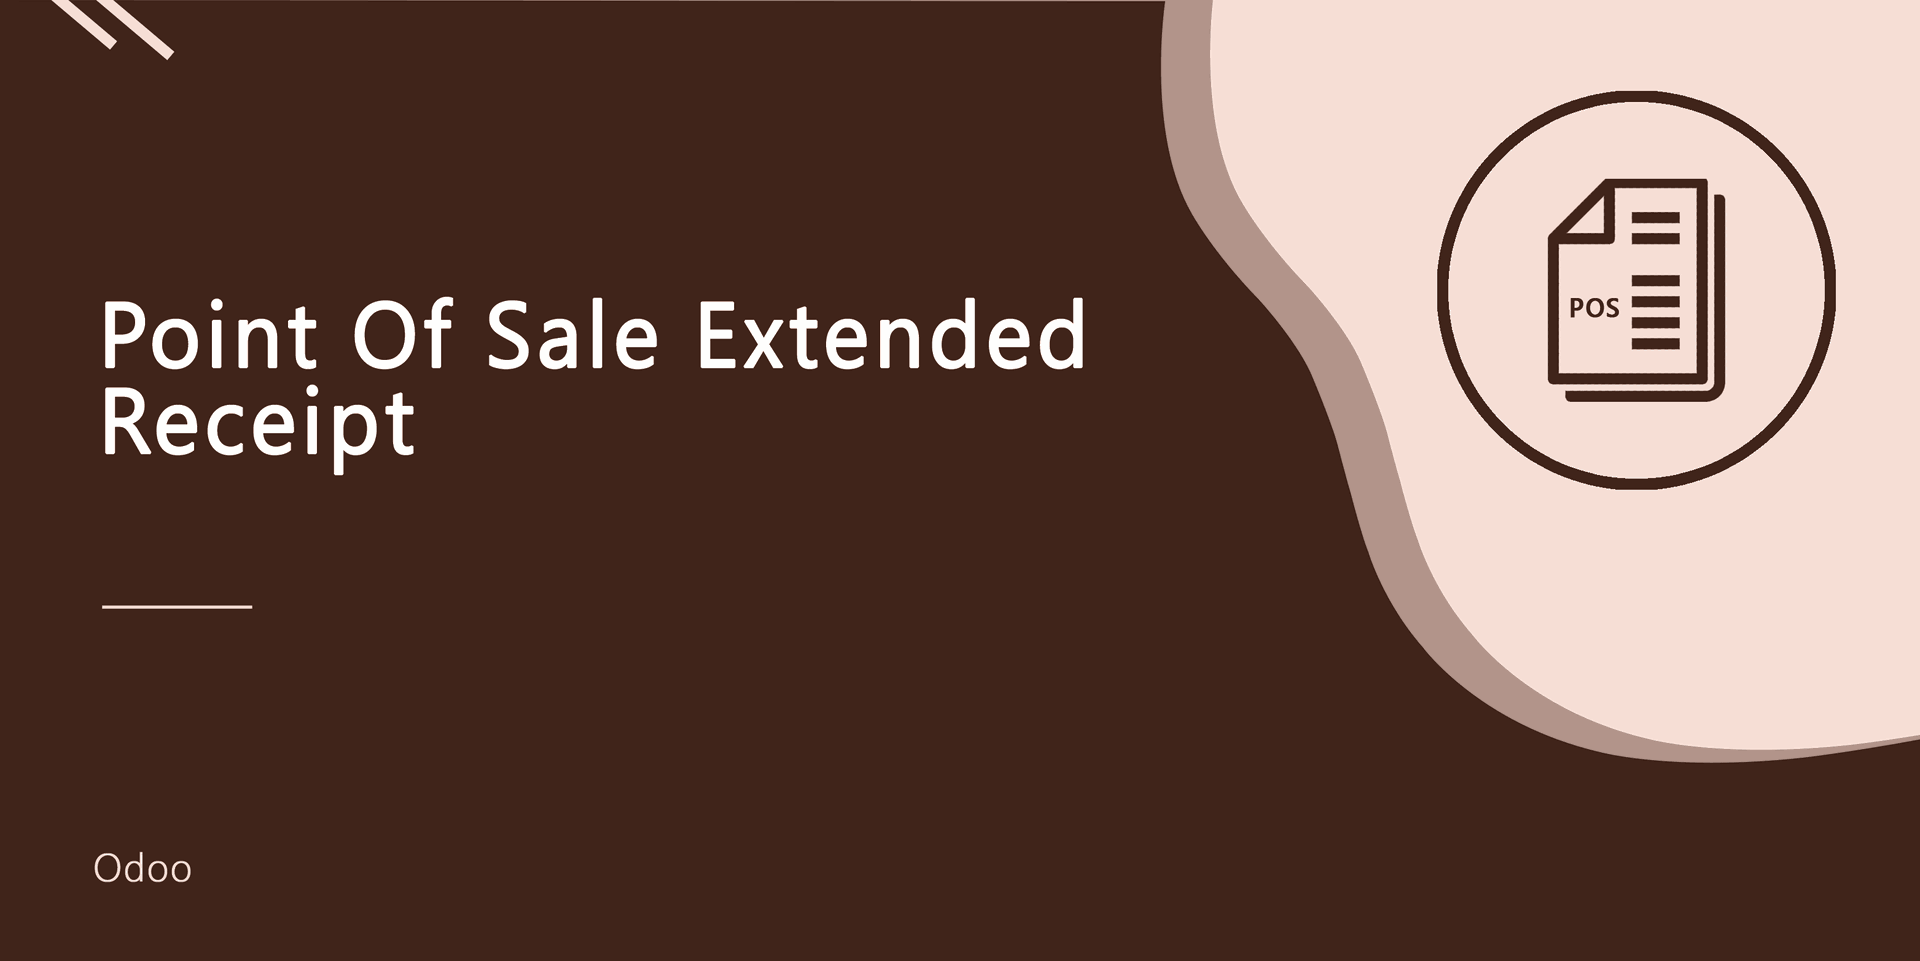 Point Of Sale Extended Receipt